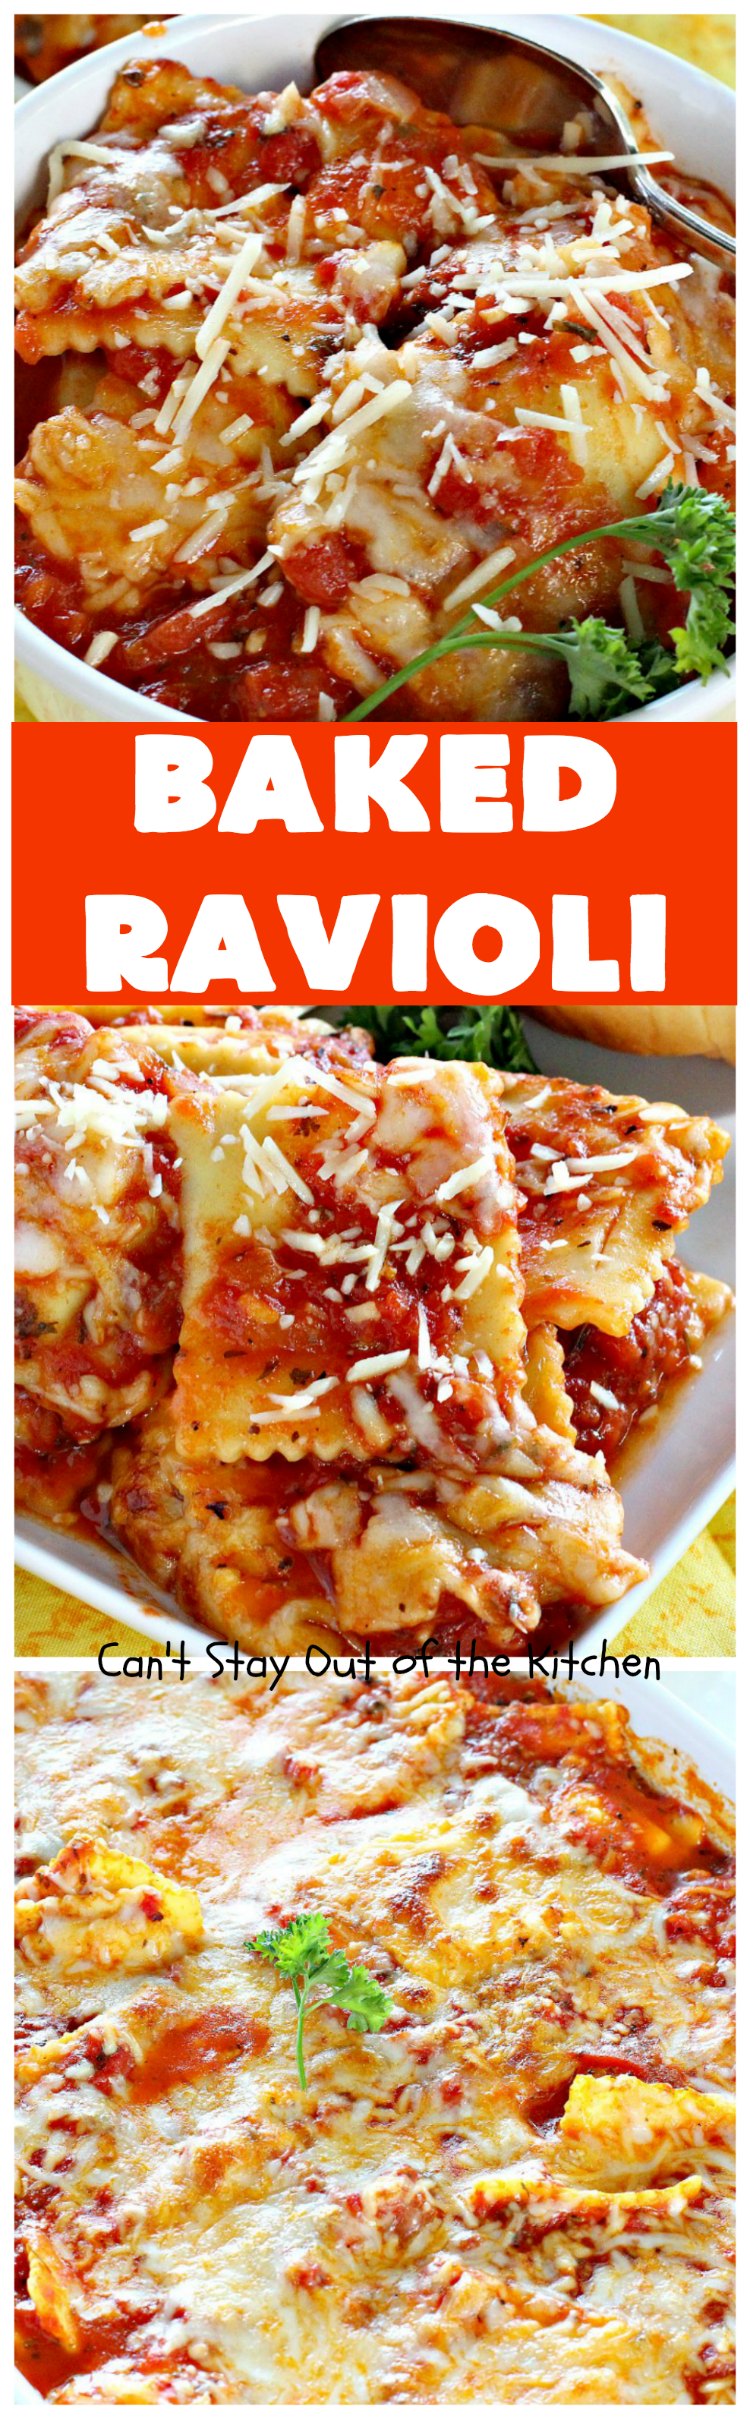 Baked Ravioli | Can't Stay Out of the Kitchen | fabulous #MarthaStewart inspiration that's kid-friendly & delicious. Perfect #pasta for #MeatlessMondays. #cheese #ravioli